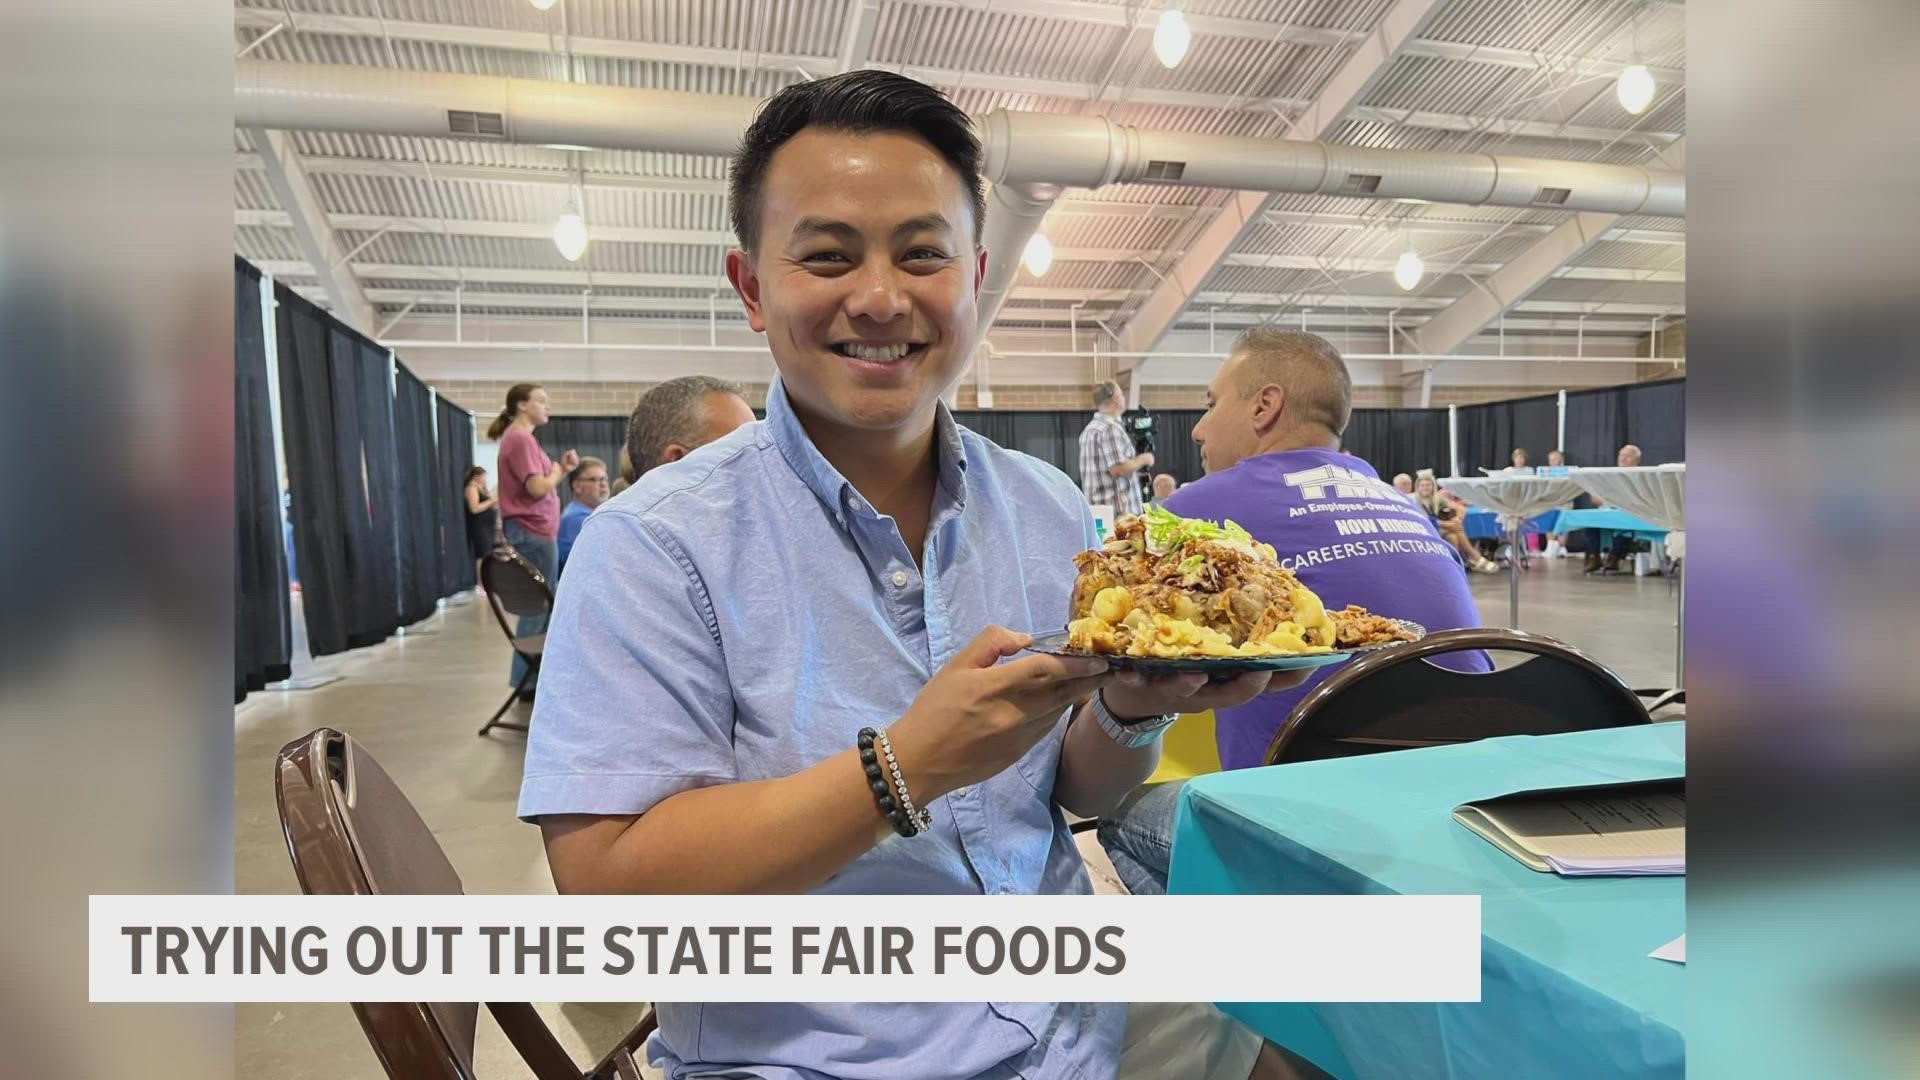 The team tried 10 new foods to help choose which treats would compete for the 2022 Iowa State Fair People's Choice Best New Food award.